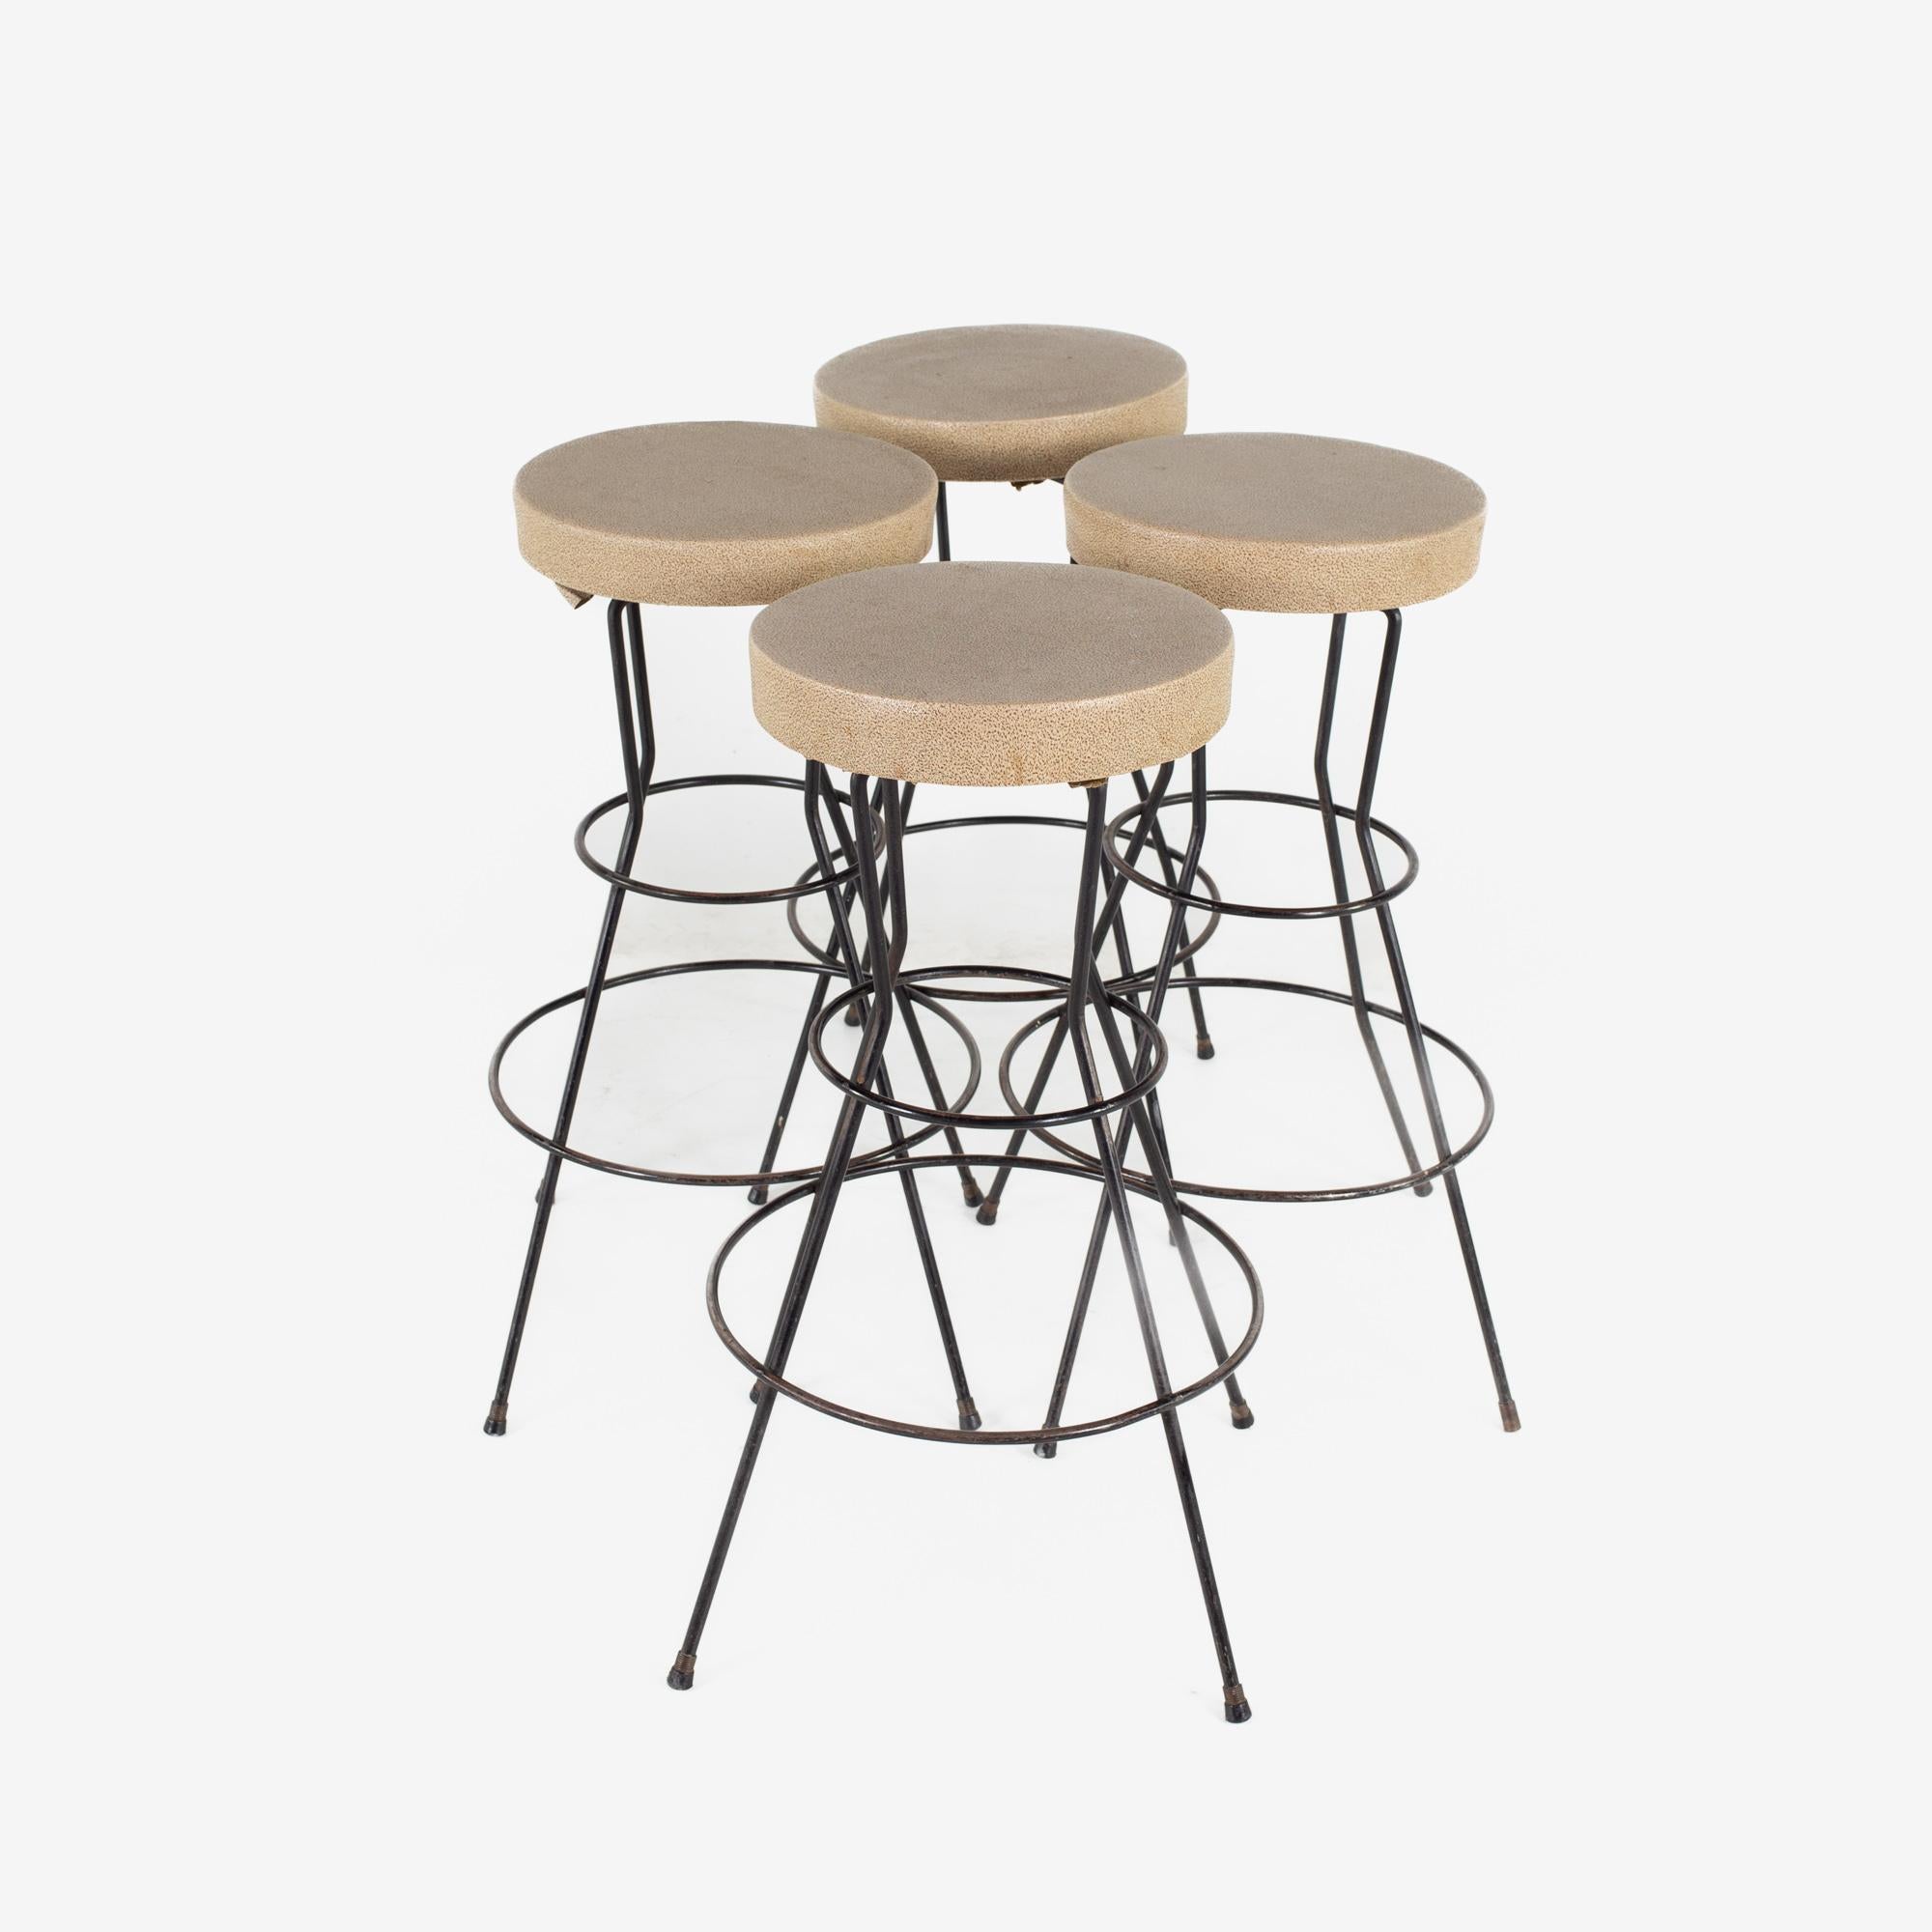 Weinberg style mid century brown vinyl and iron stools - Set of 4

Each stool measures: 21 wide x 21 deep x 28.5 inches high

All pieces of furniture can be had in what we call restored vintage condition. That means the piece is restored upon